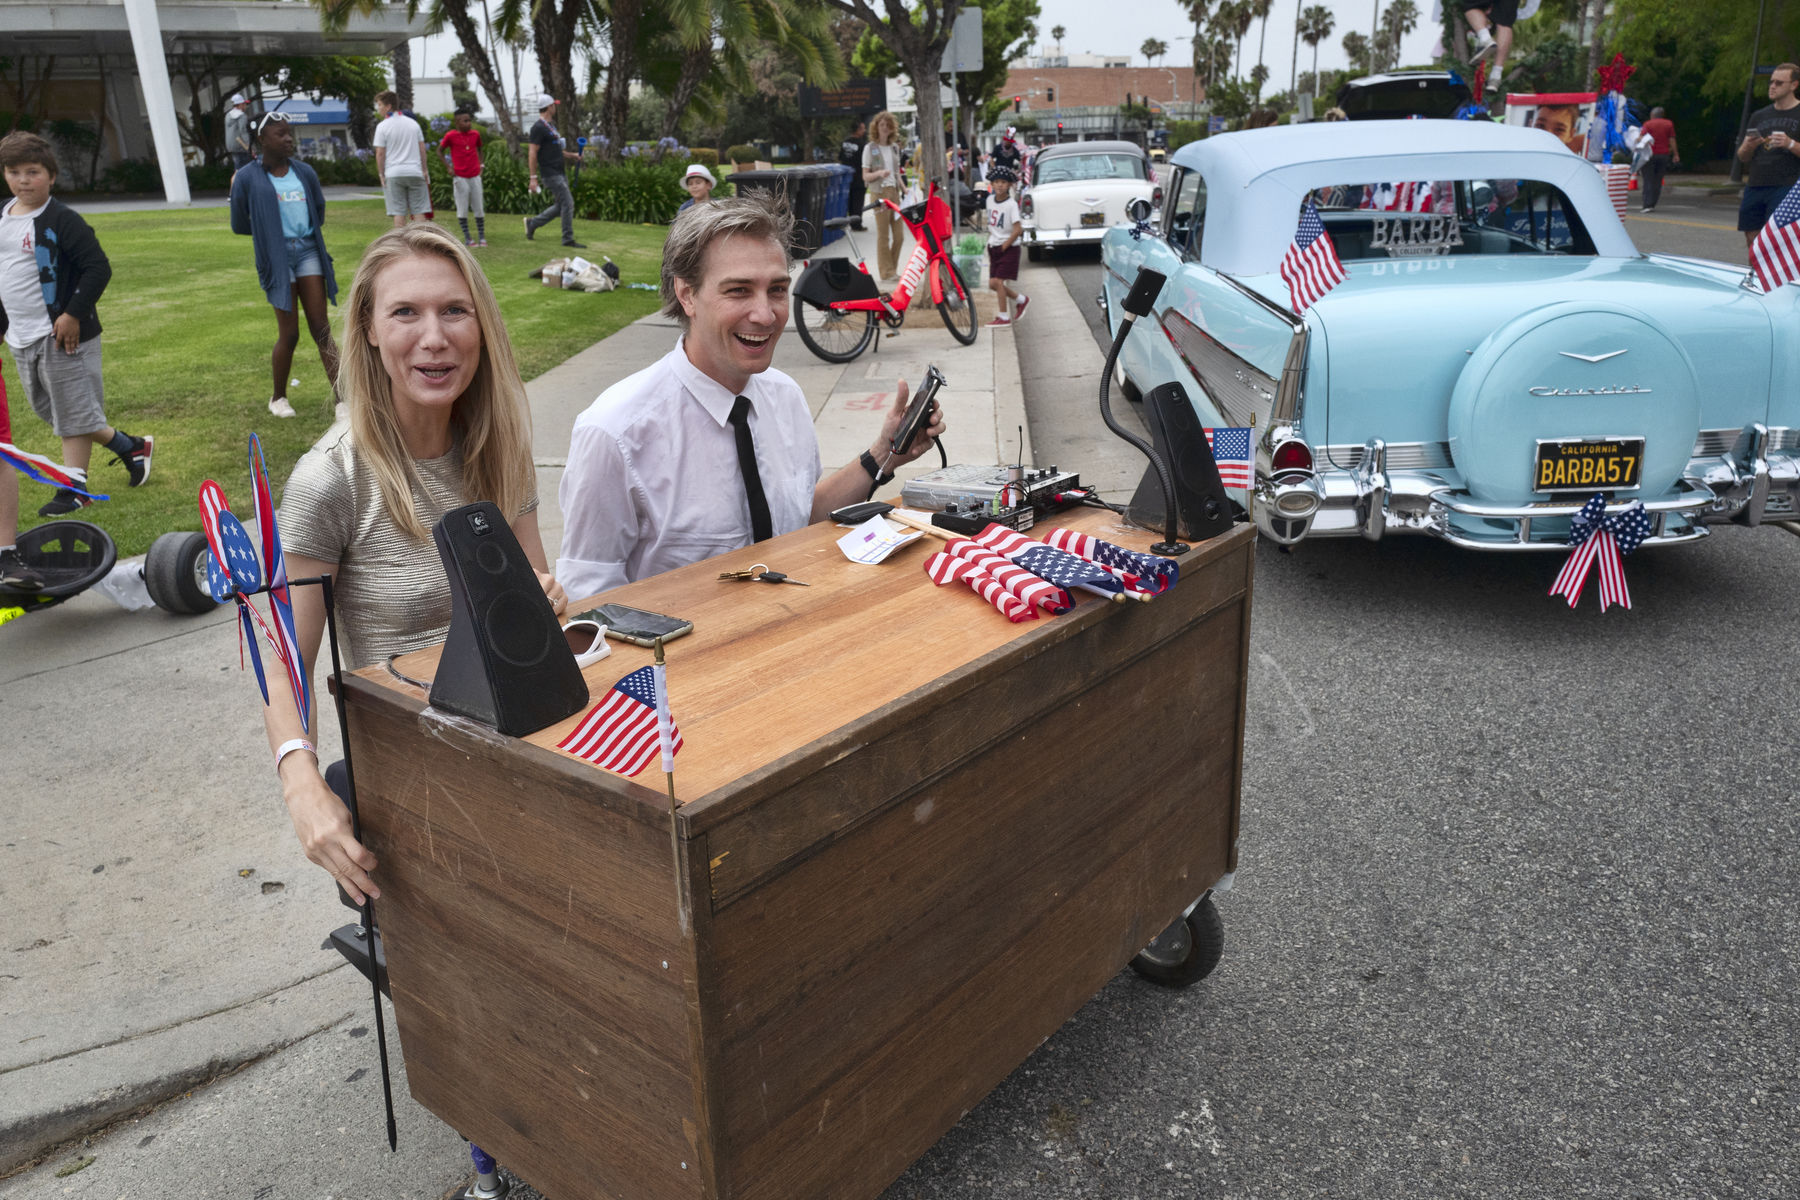 Gray Bright, and Kyle McAuley arrive to participate in the Fourth of July parade with their motorized "Late Nite" desk to conduct interviews with scientists and tech people on Thursday, July 4, 2019 in Santa Monica, Calif. (AP Photo/Richard Vogel)